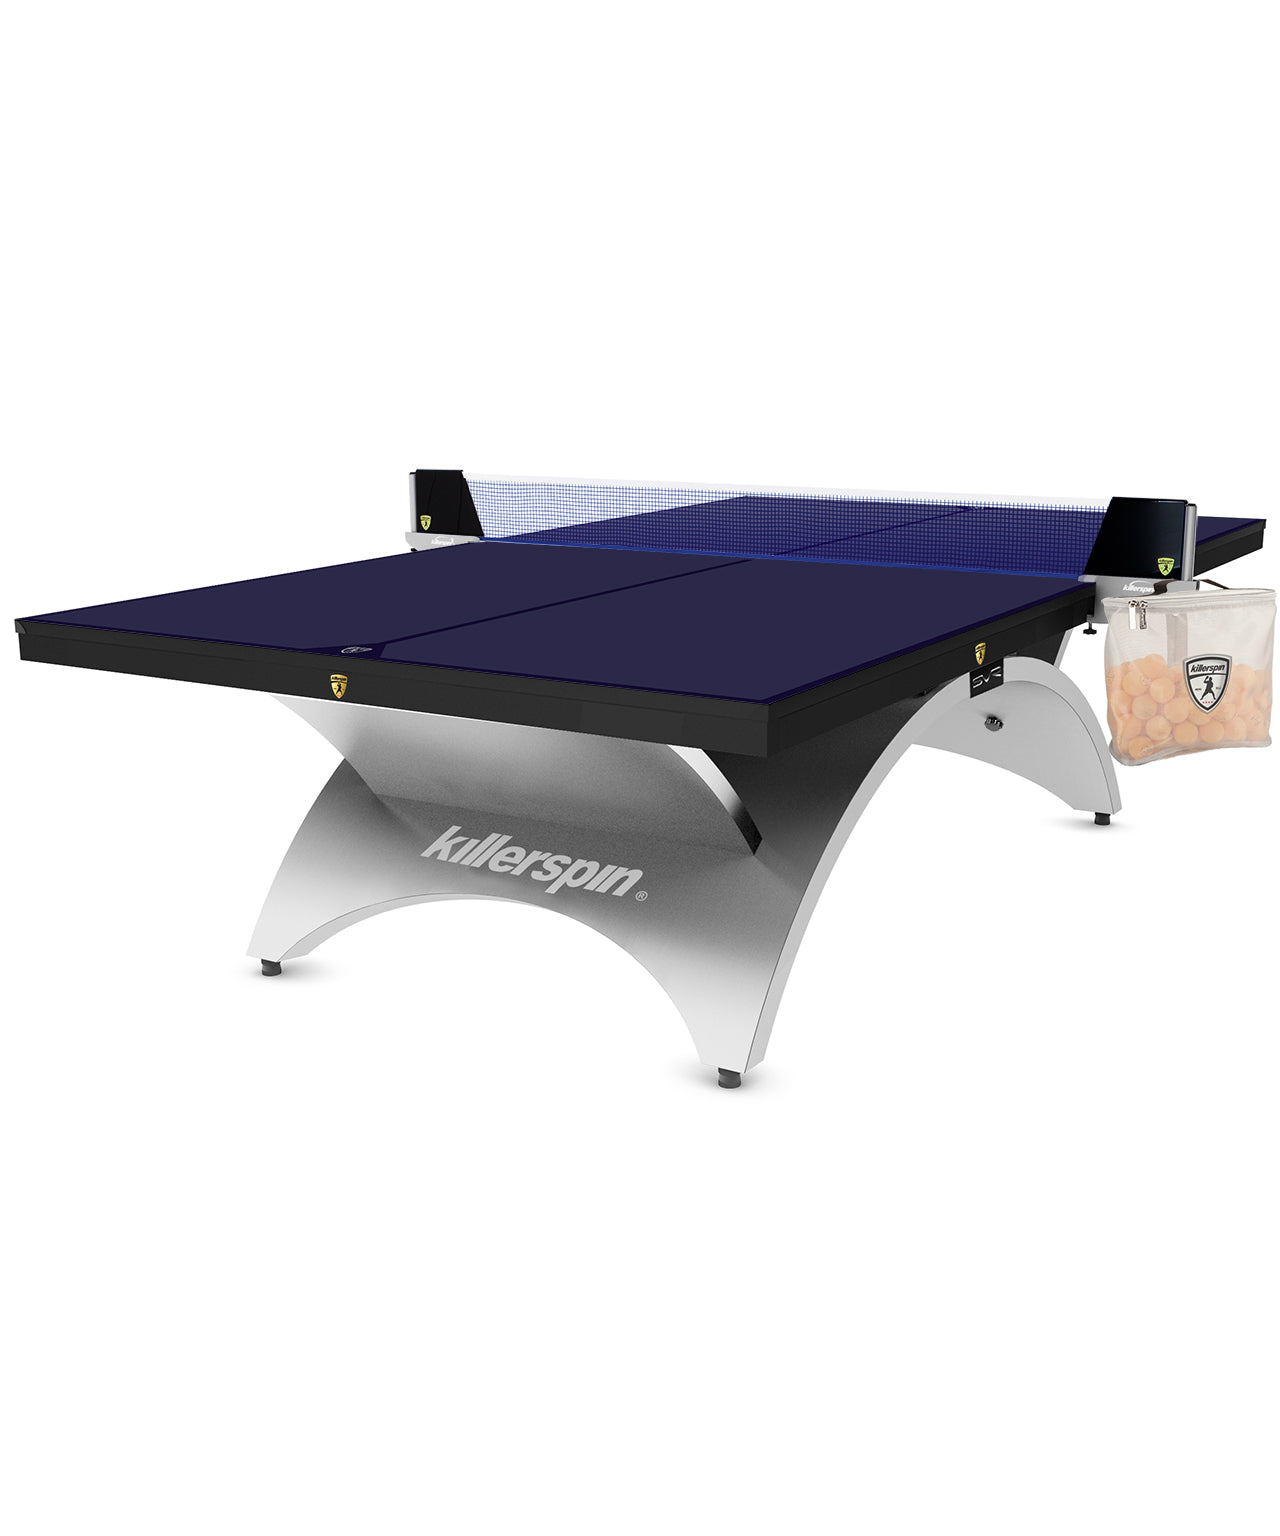 Killerspin SVR Side Pouch Ping Pong Balls Table Tennis Net